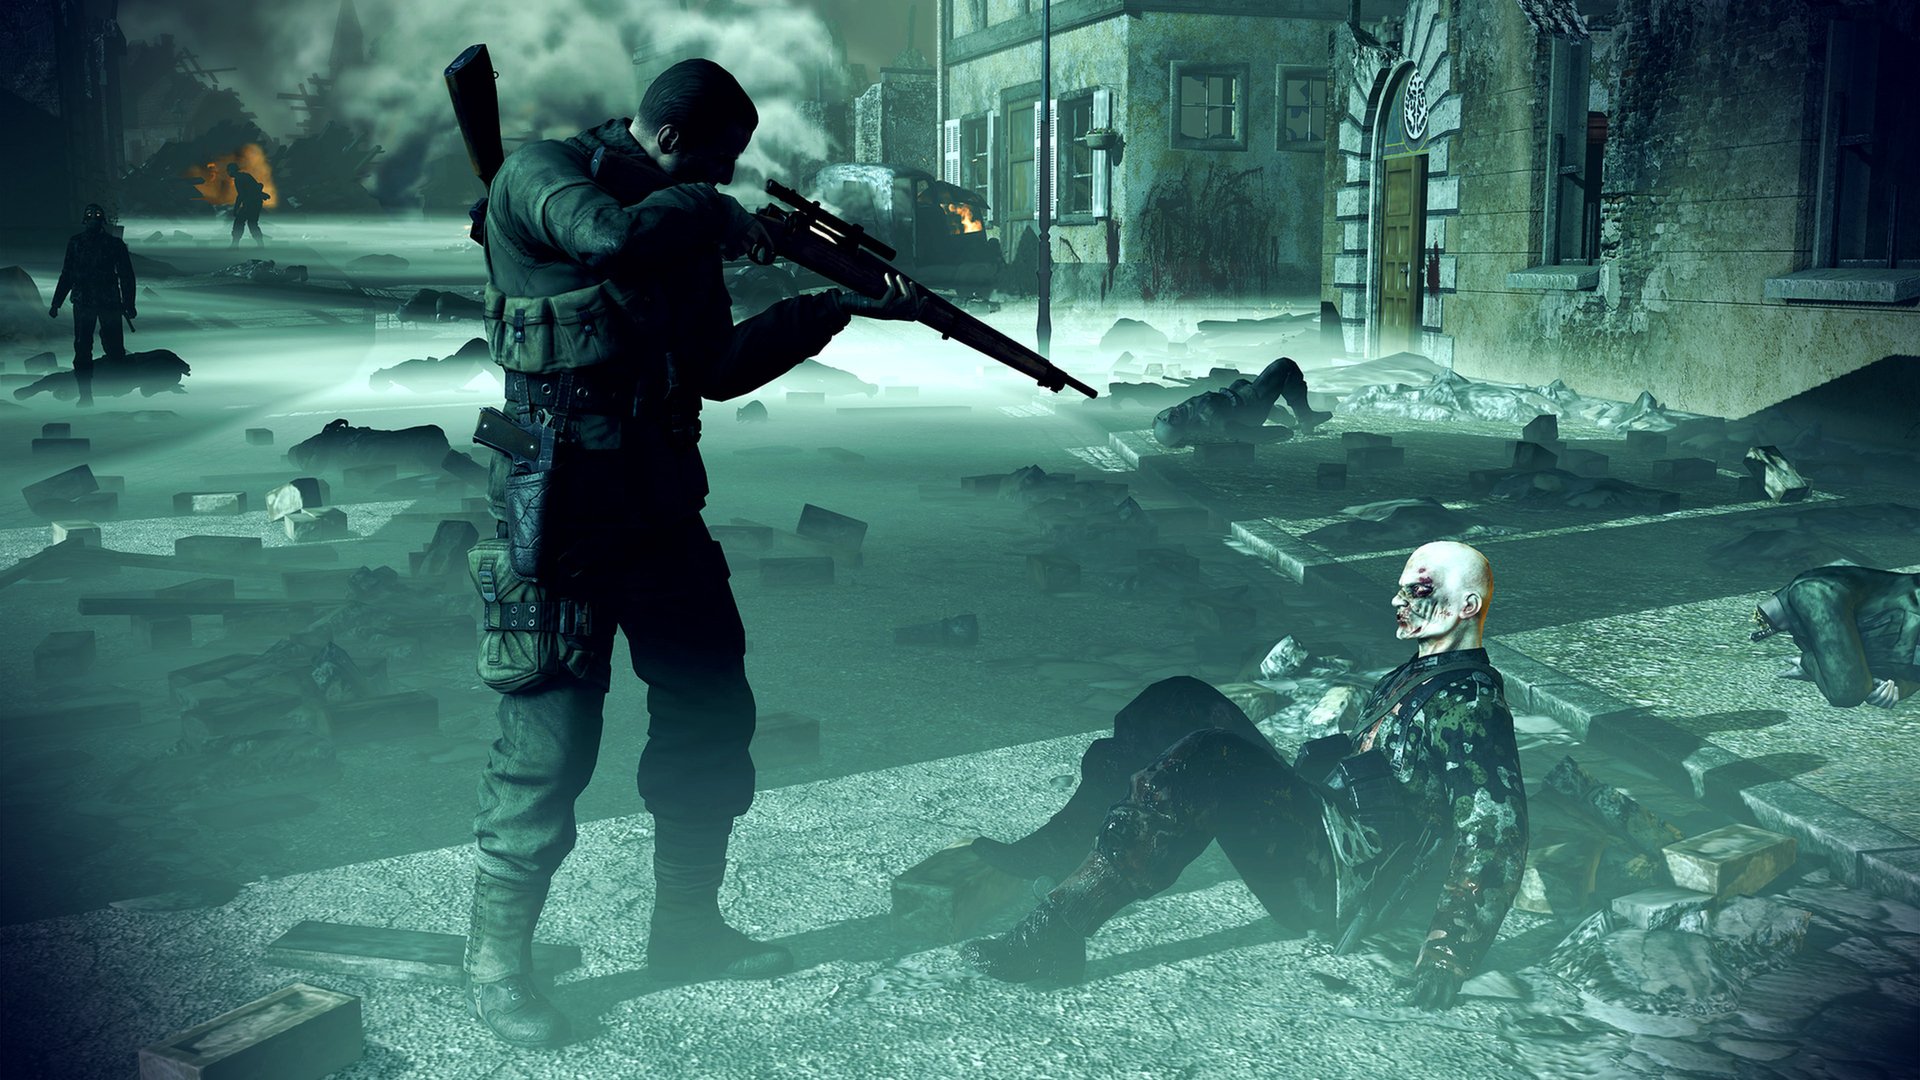 Nazi Zombie Army Hd Wallpapers - Sniper Elite Zombie Nazi Army , HD Wallpaper & Backgrounds